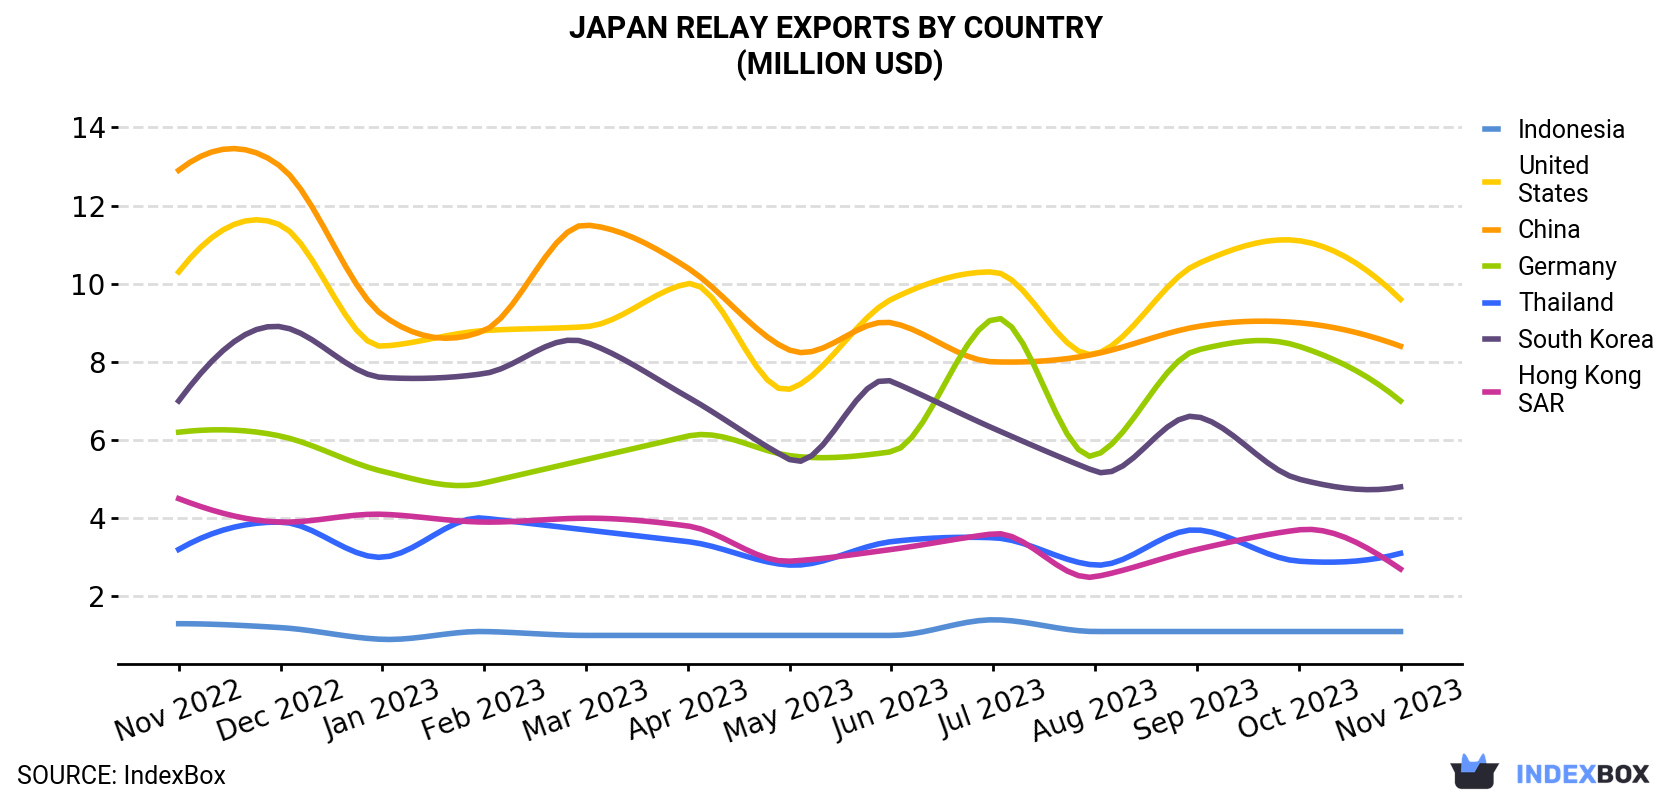 Japan Relay Exports By Country (Million USD)